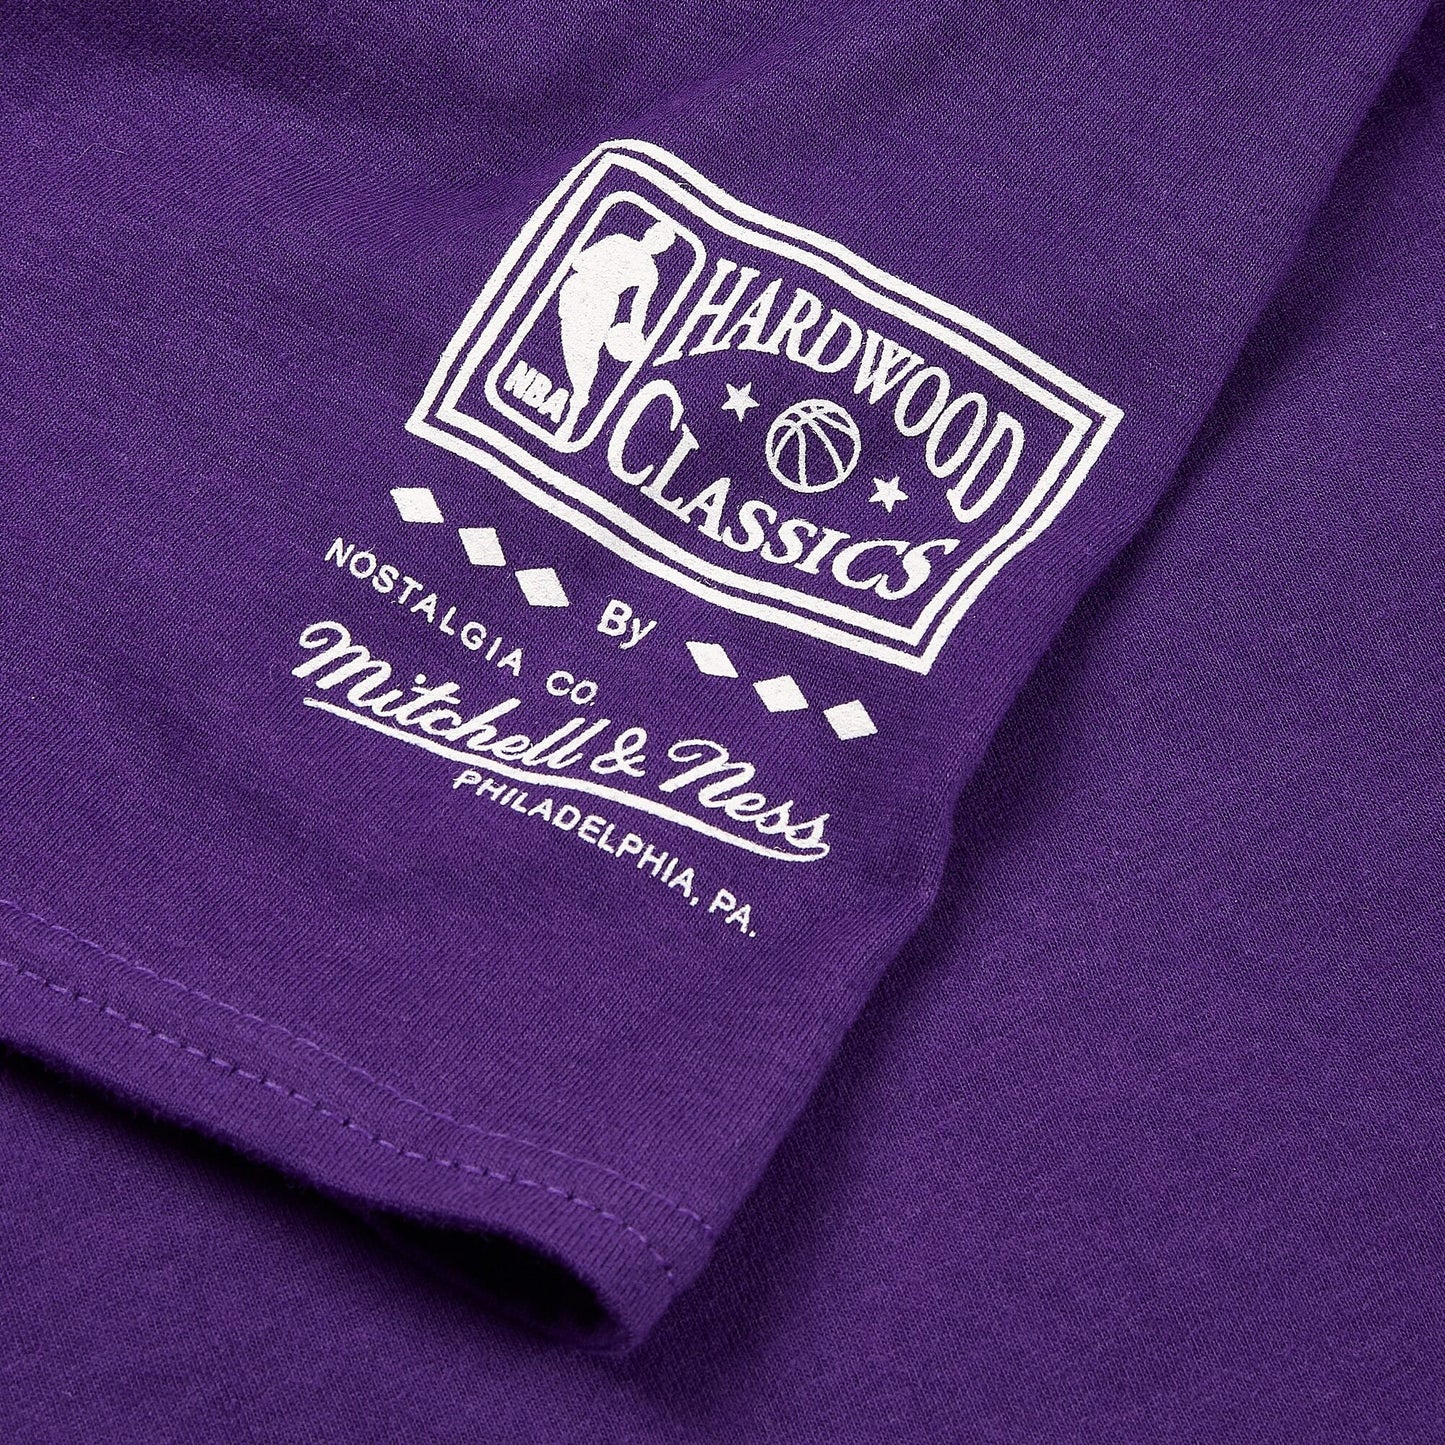 Mitchell & Ness NBA Champs Lakers Tee LOS ANGELES LAKERS PURPLE